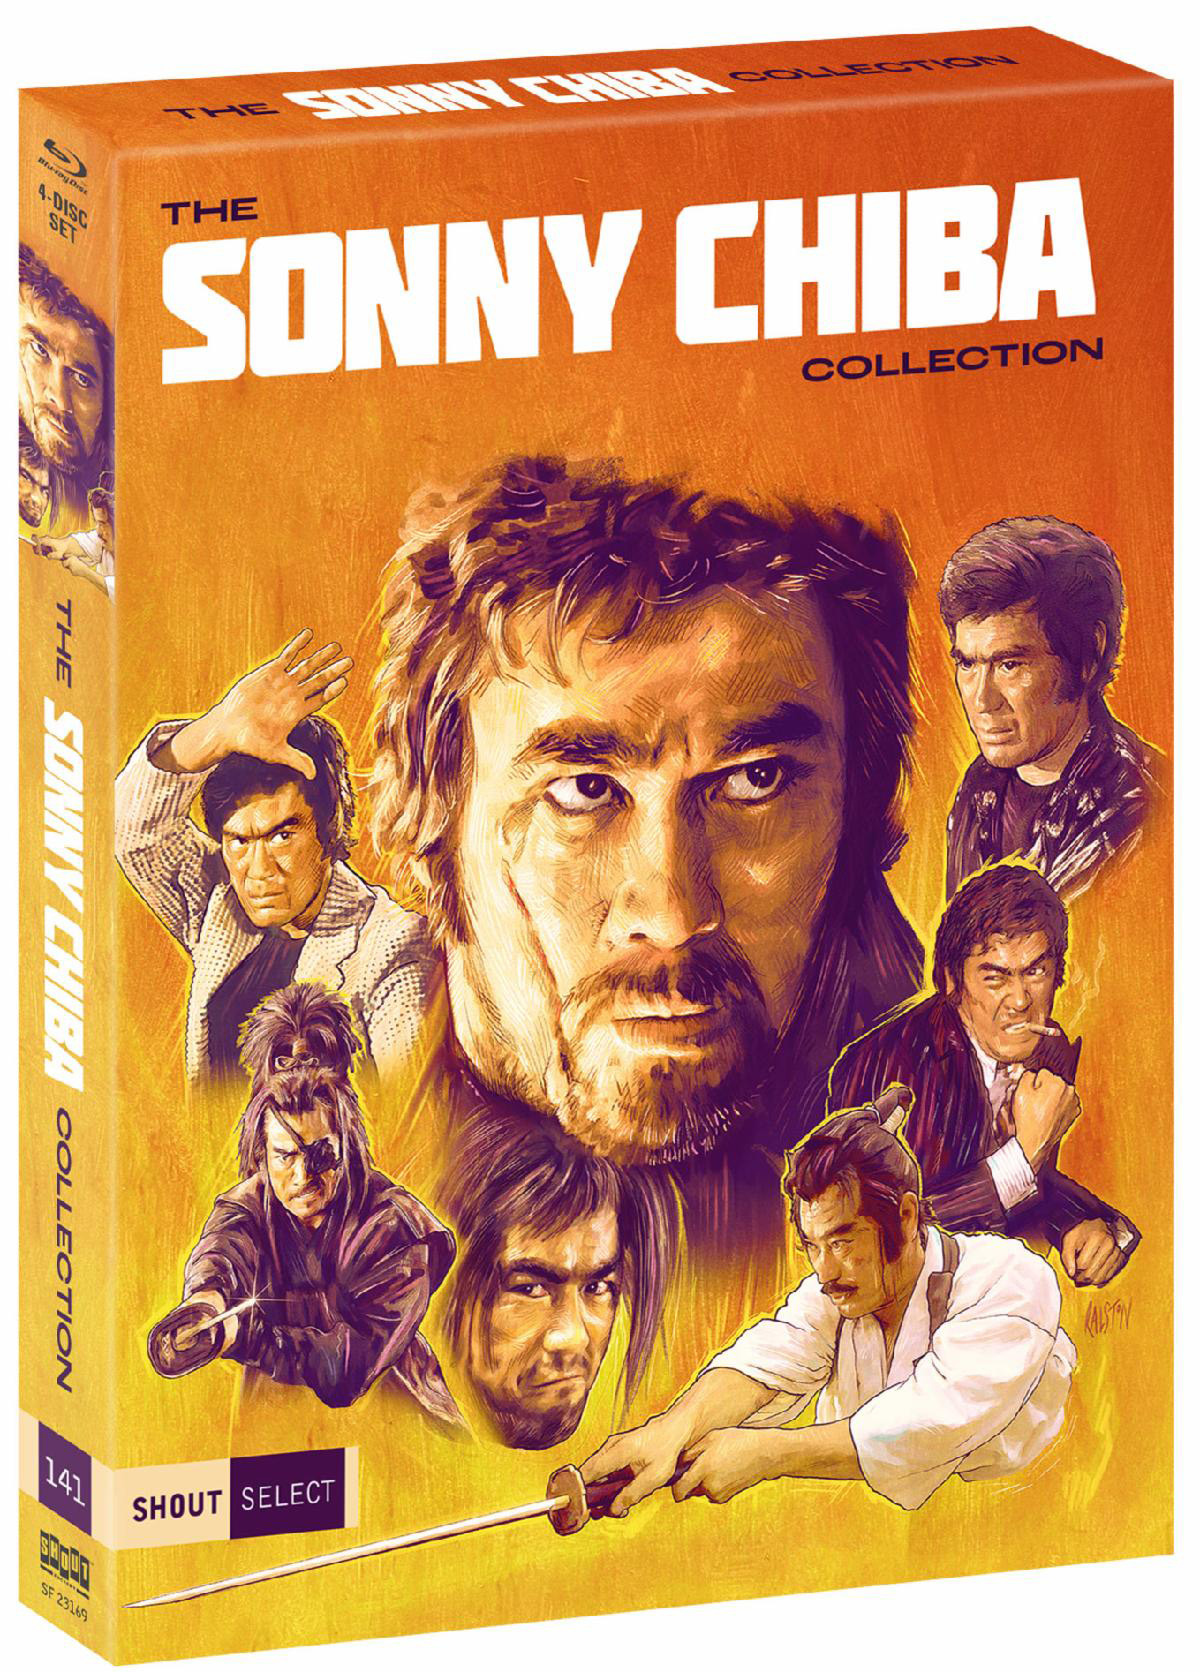 The Sonny Chiba Collection 